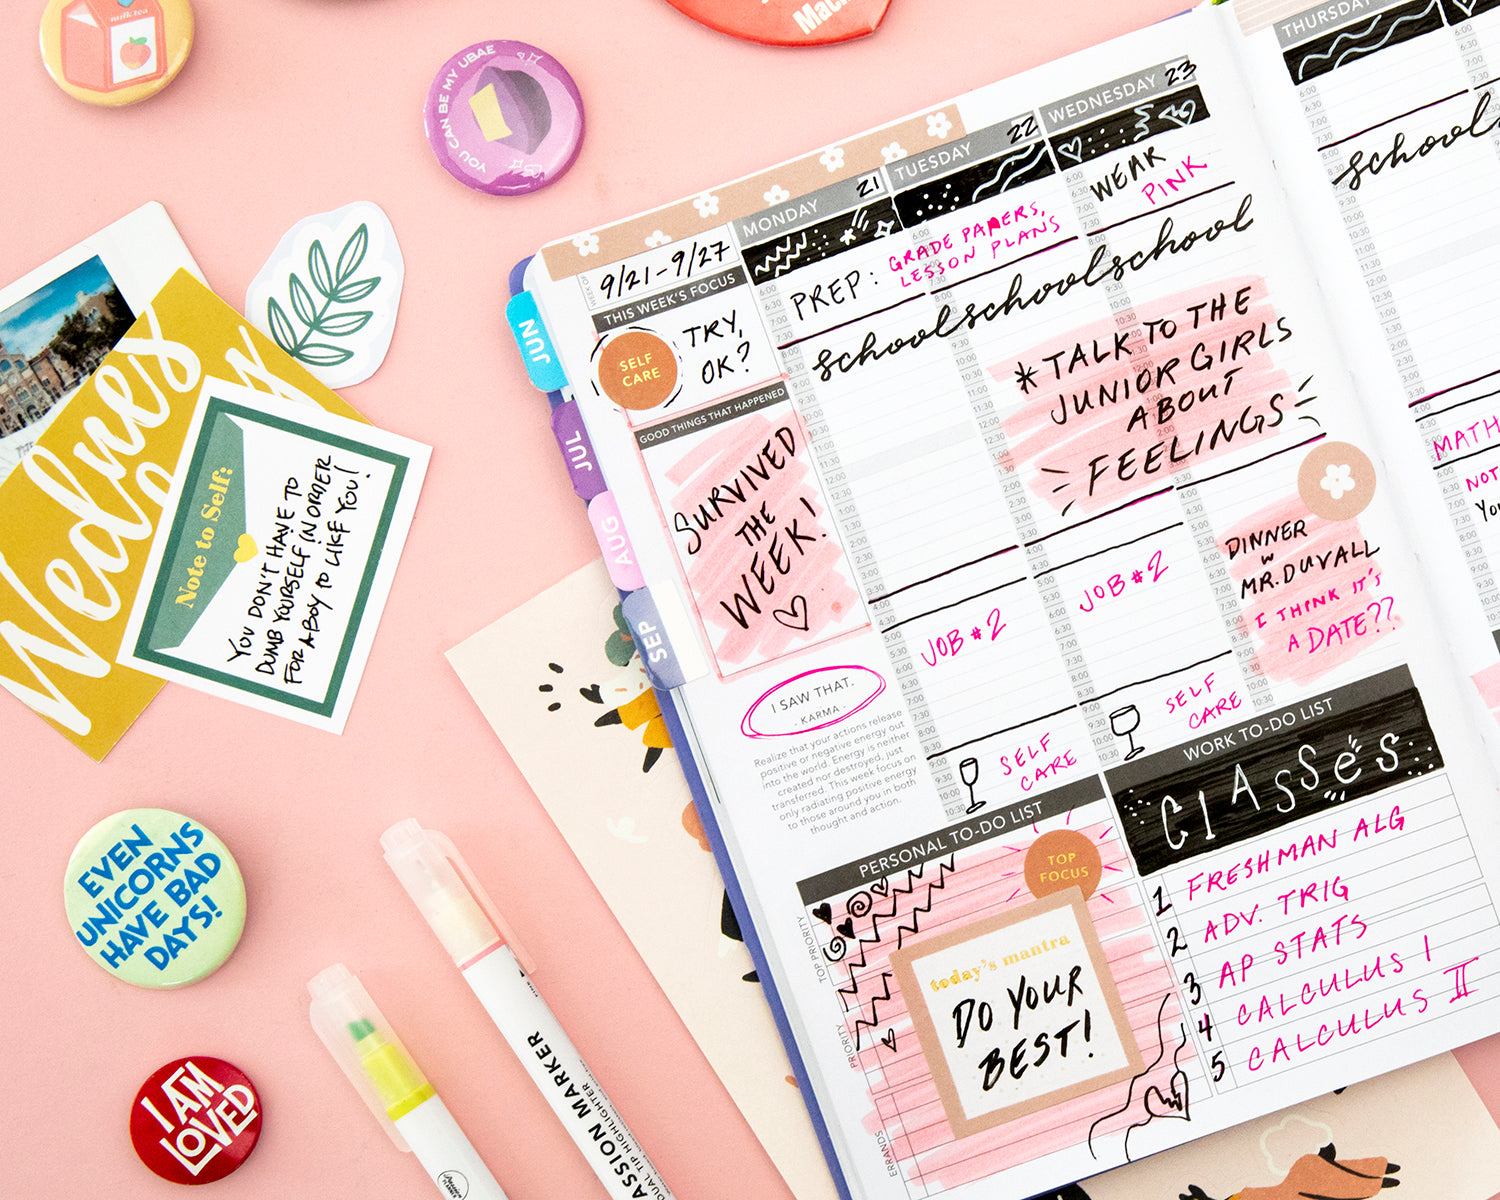 Passion Planner Idea based on Ms. Norbury from Mean Girls